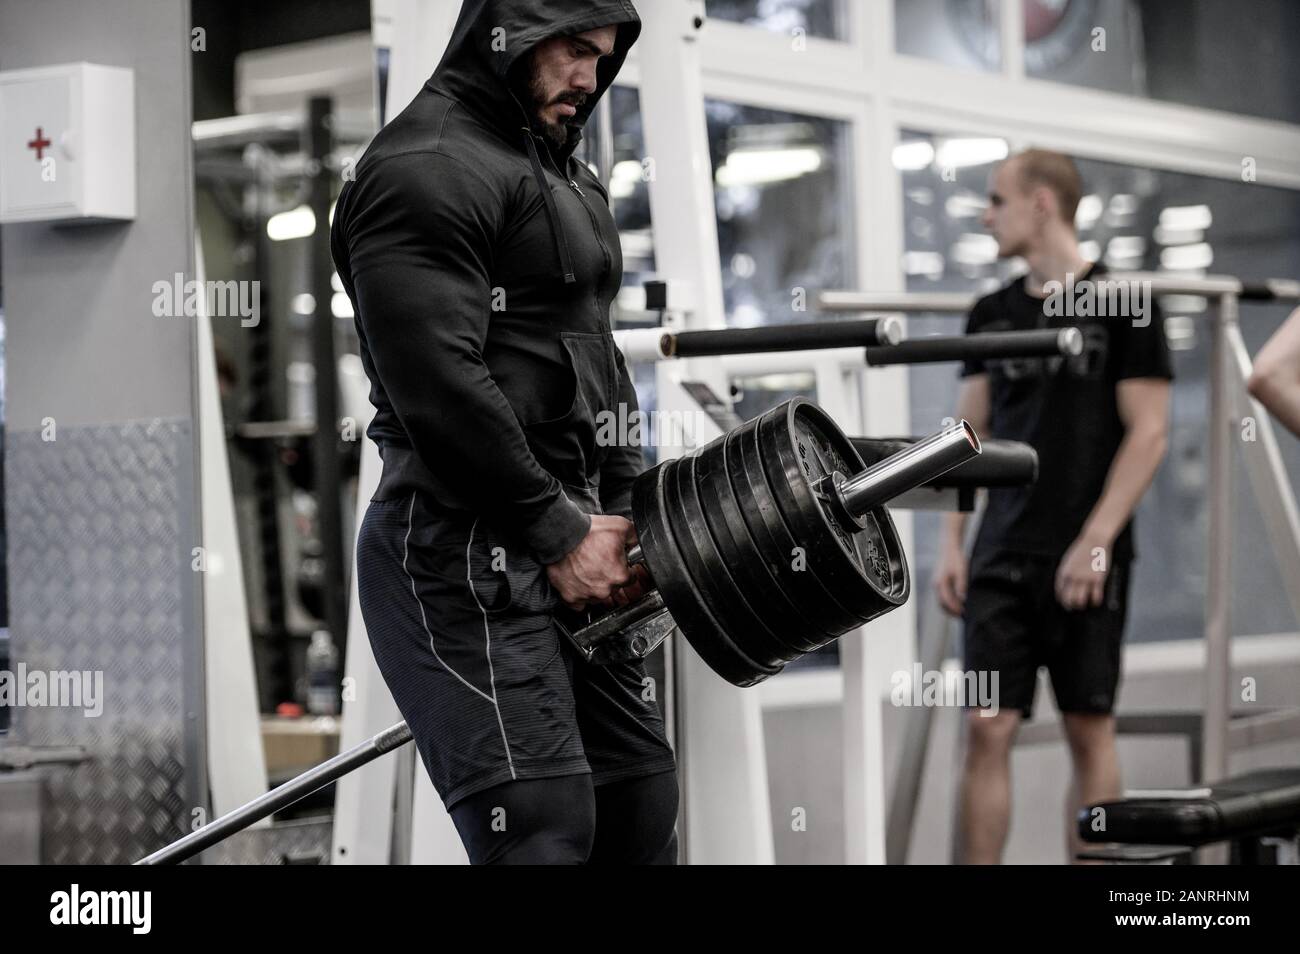 strong bearded man in hoodie lifting heavy barbell deadlift among people  indoors gym sport training workout Stock Photo - Alamy